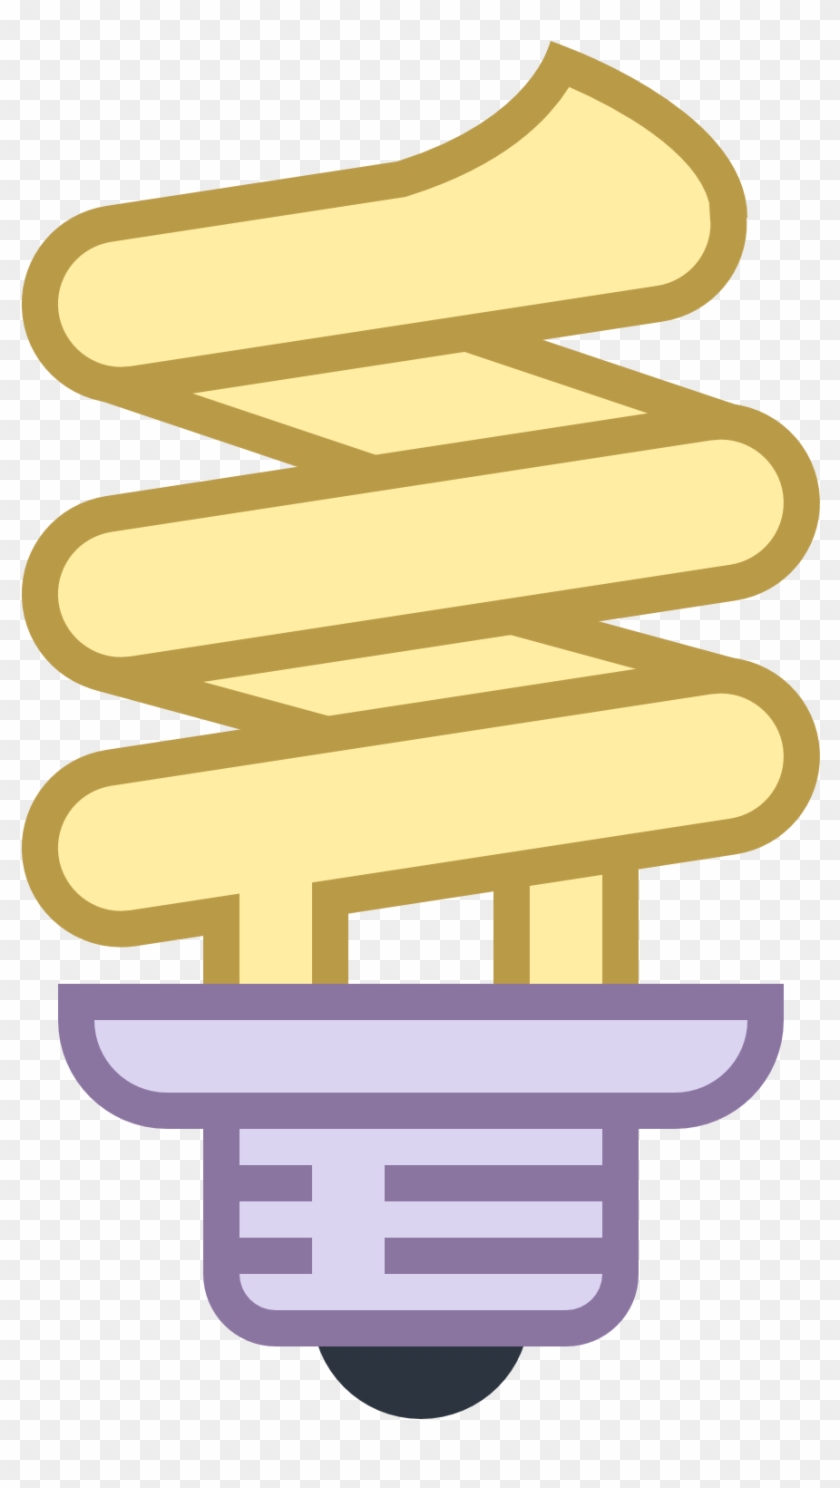 Spiral Bulb Icon Free Download At Icons8 - Office #729138